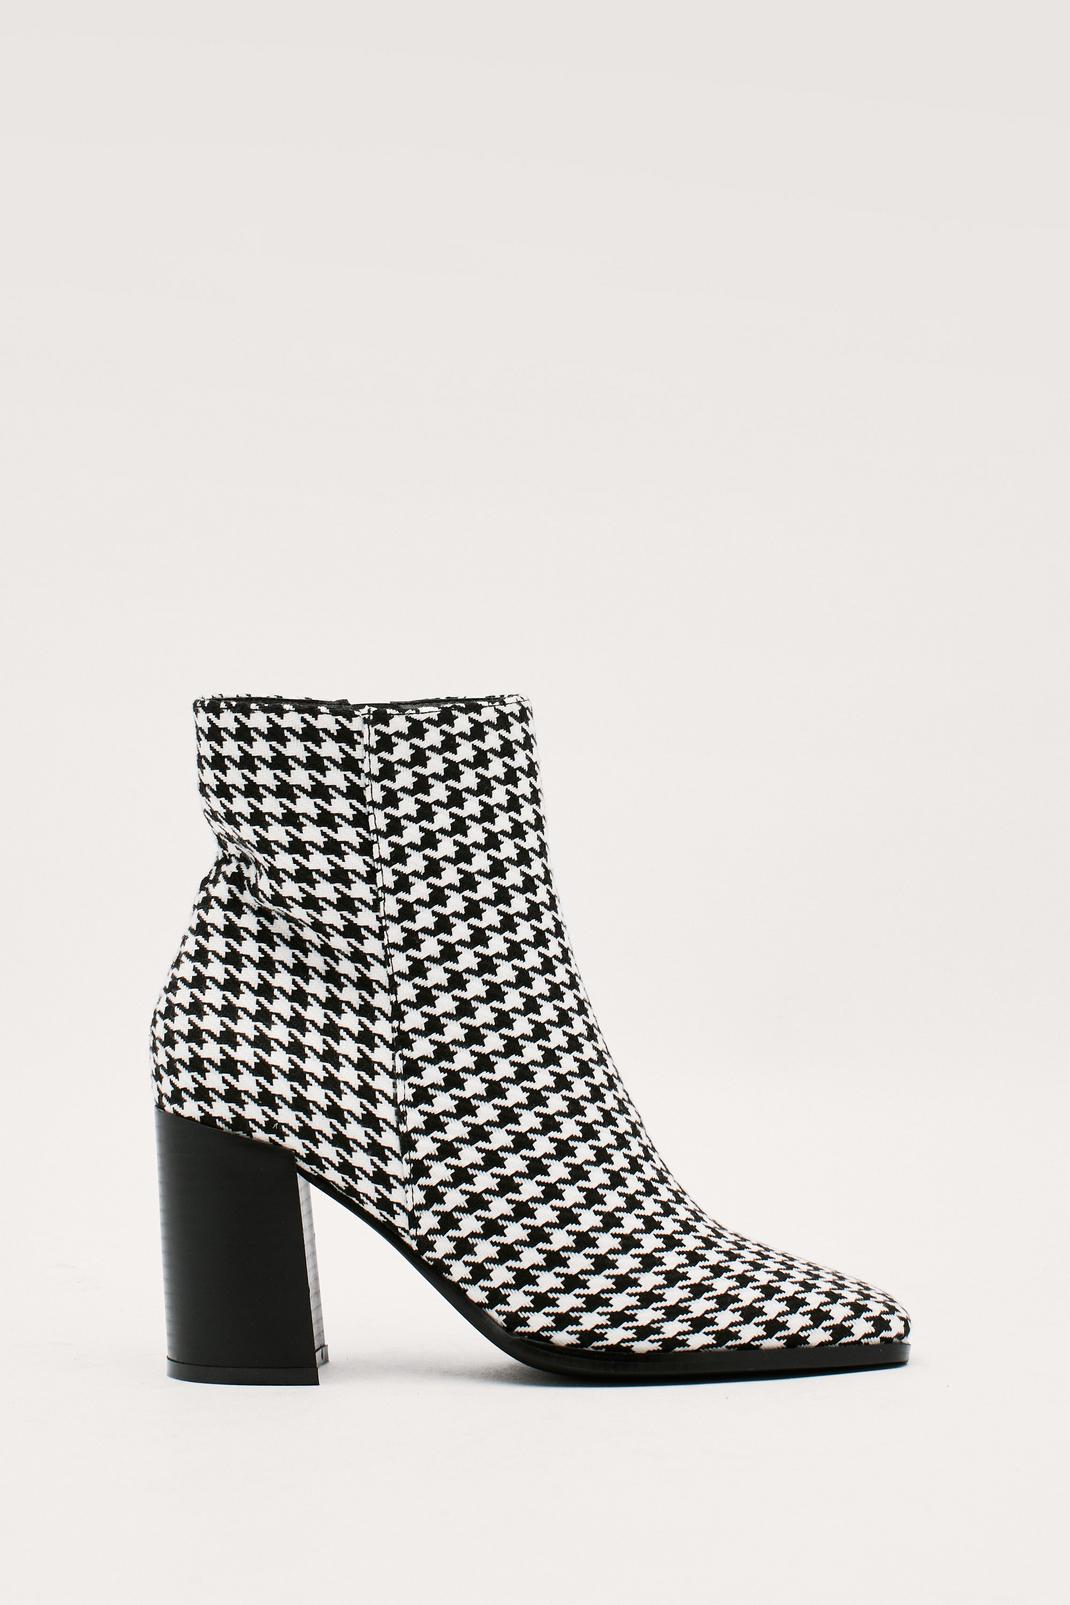 Houndstooth Square Toe Ankle Boots image number 1